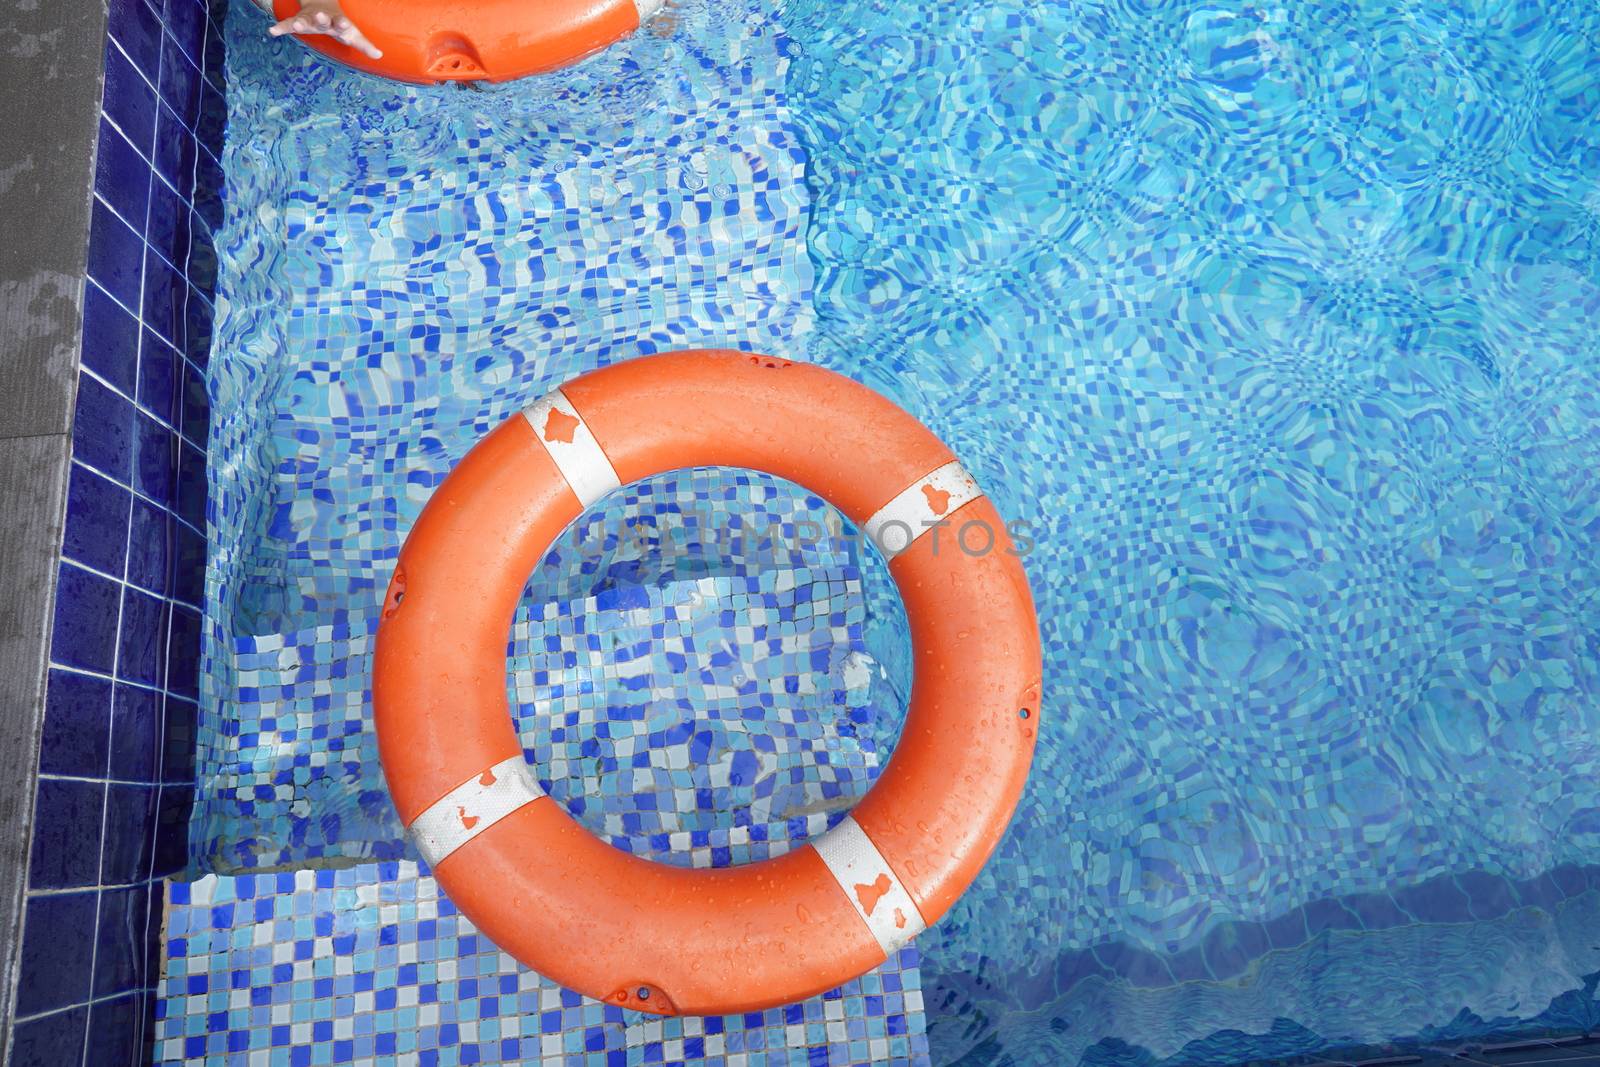 Safety equipment, life buoys, or rescue red buoys in the pool to by noppha80